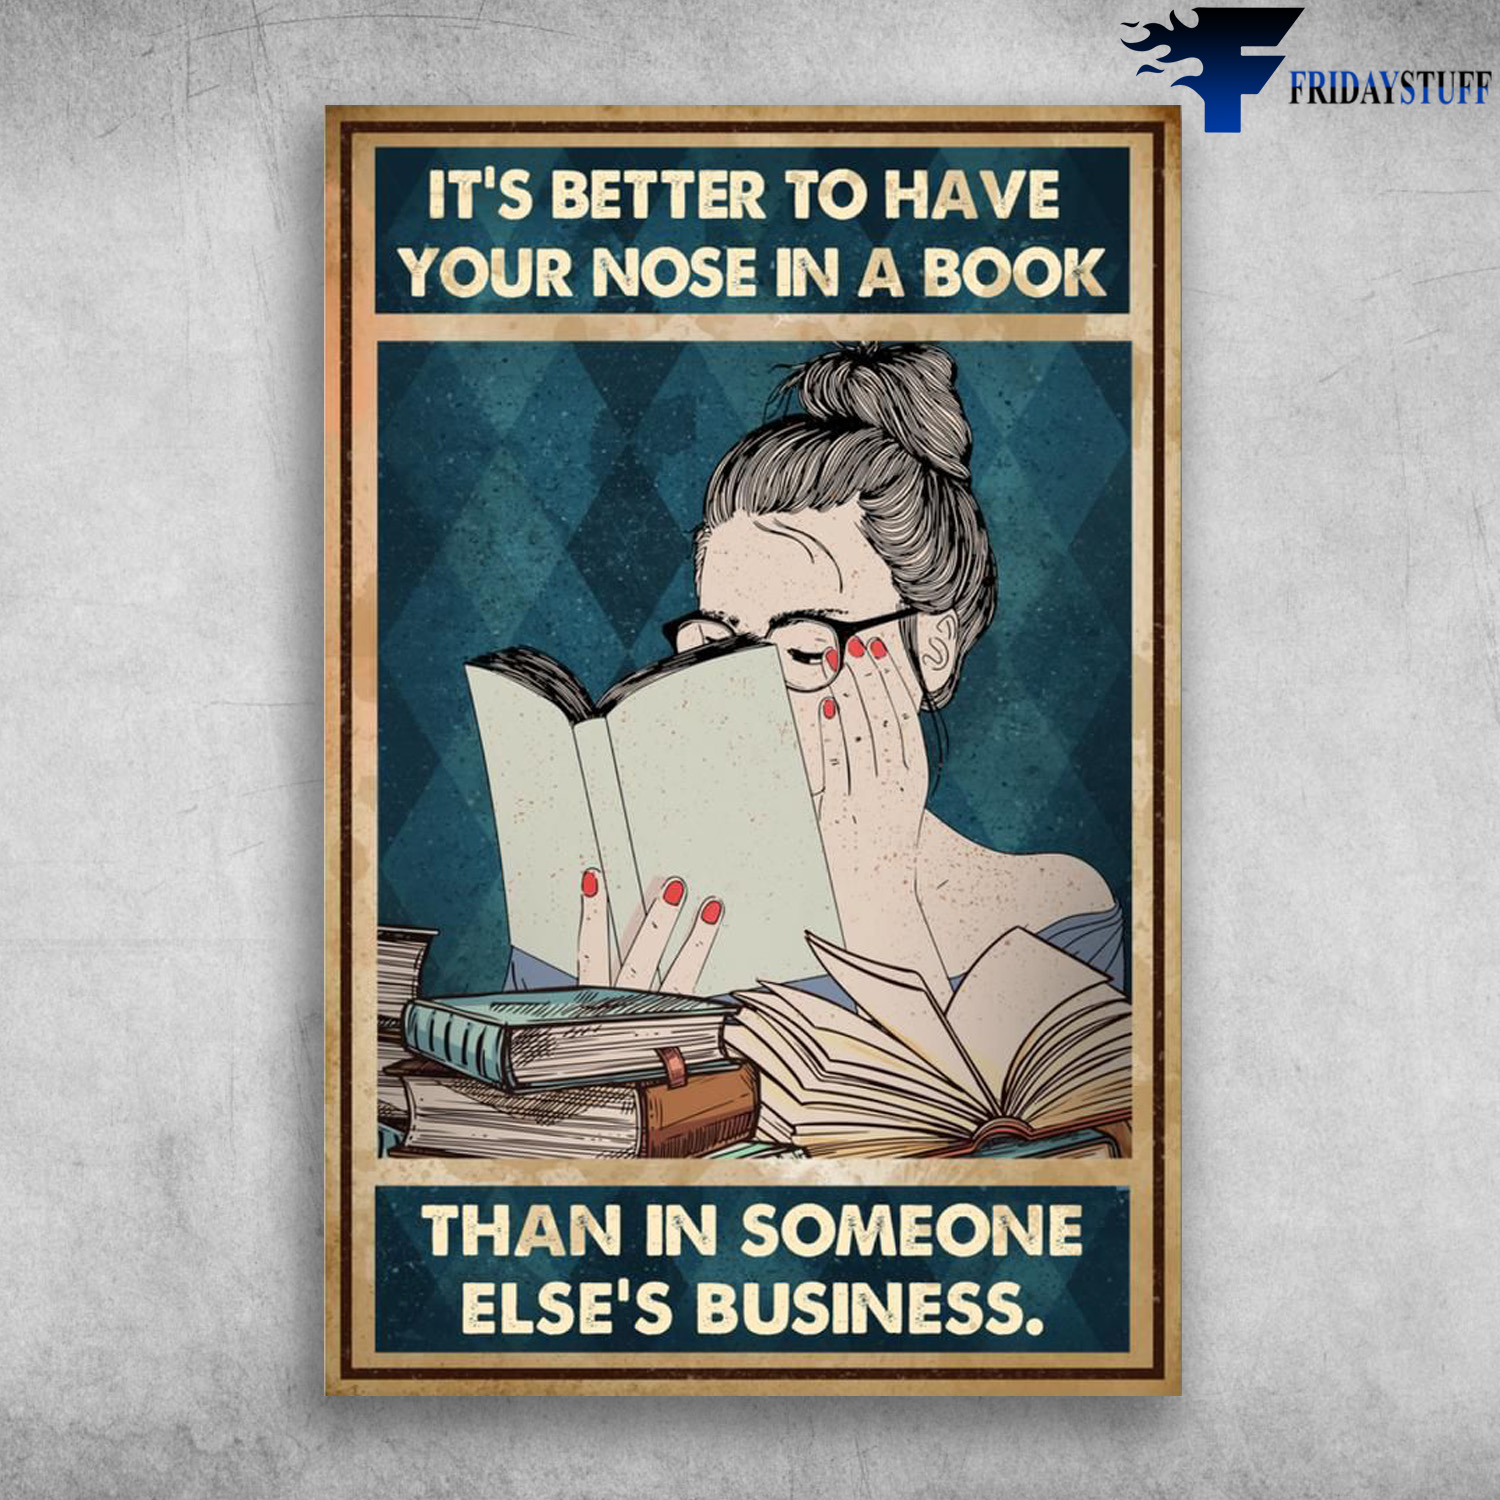 Girl Reading Books - It's Better To Have Your Nose In A Book, Than In Someone Else's Business